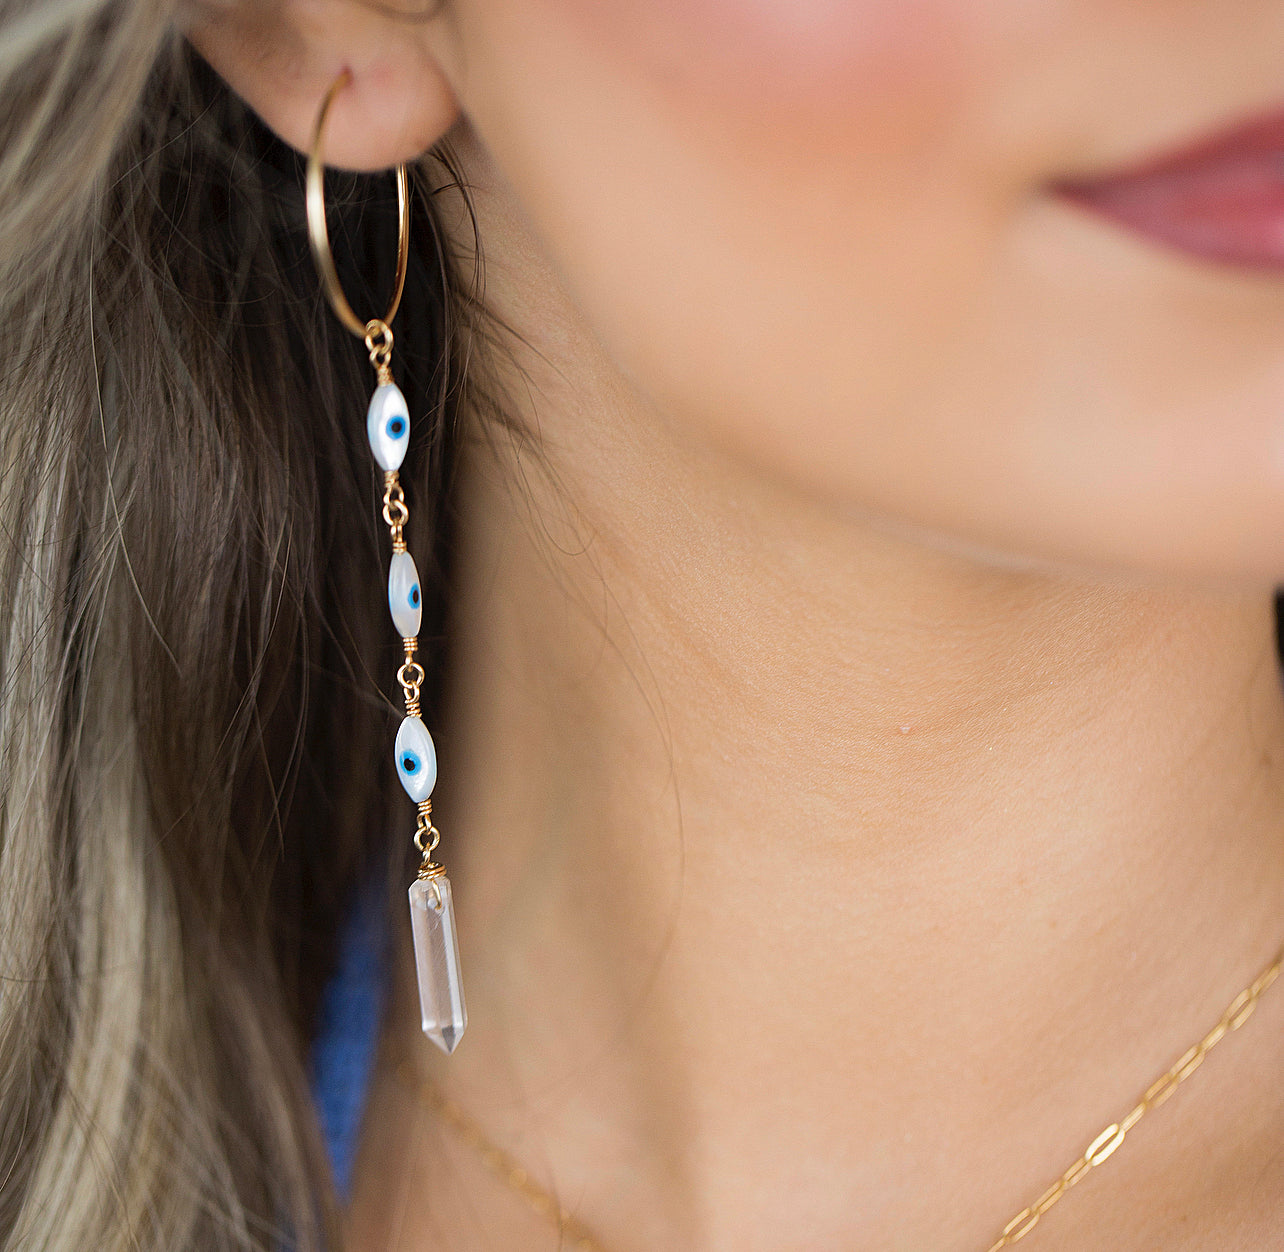 I Play mother of pearl moonstone earrings